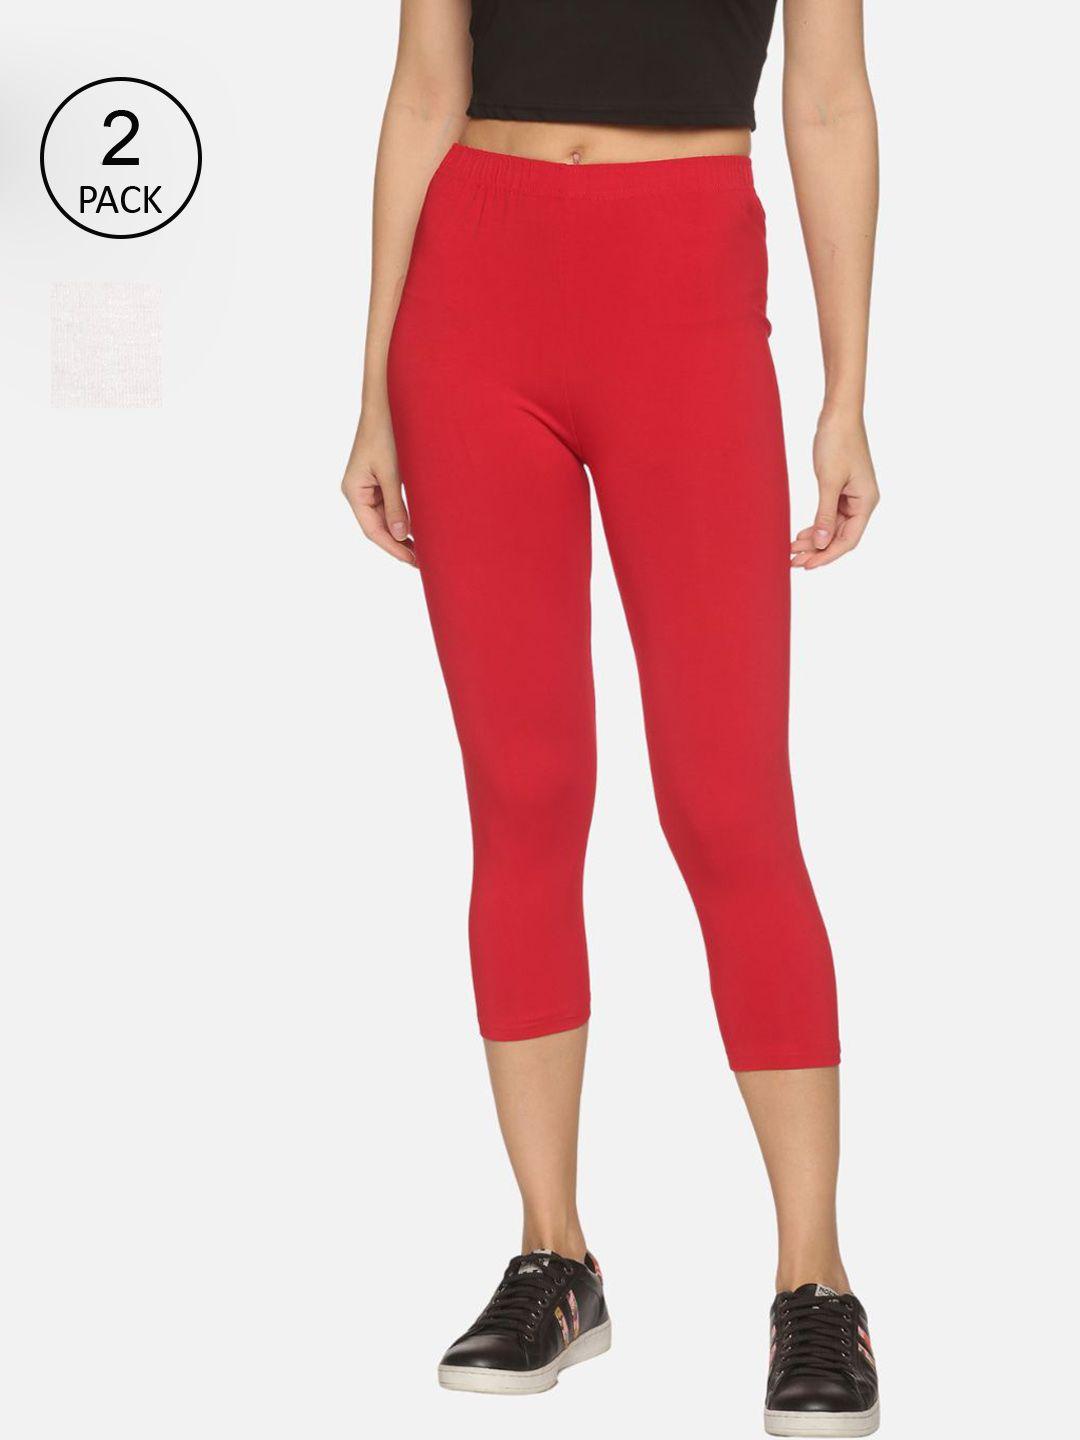 outflits women red capris